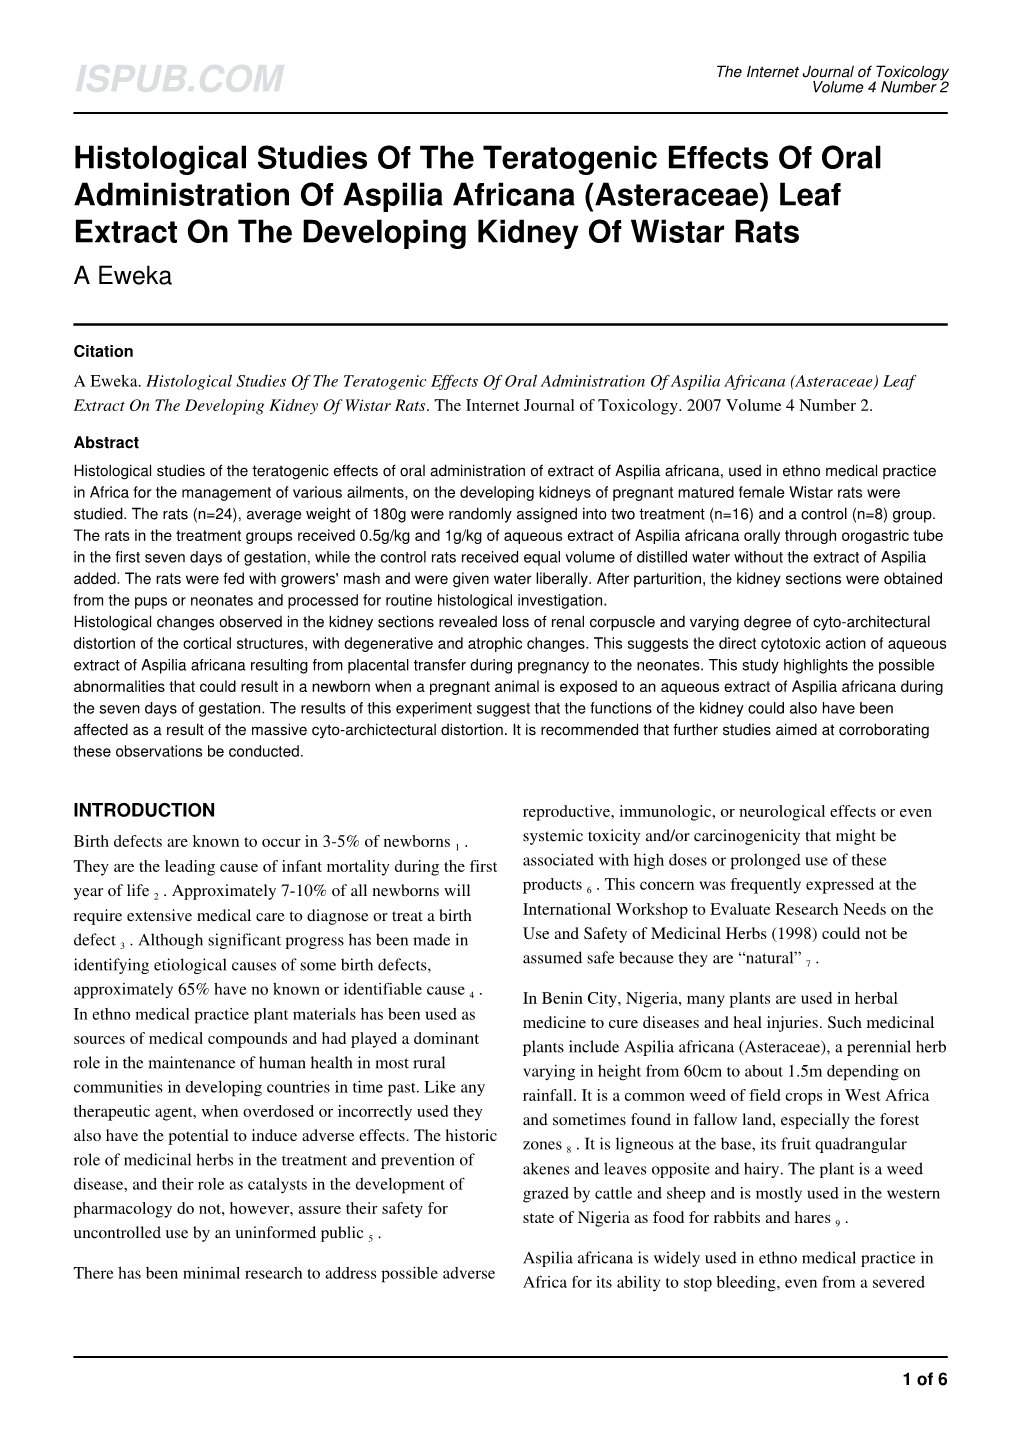 Leaf Extract on the Developing Kidney of Wistar Rats a Eweka